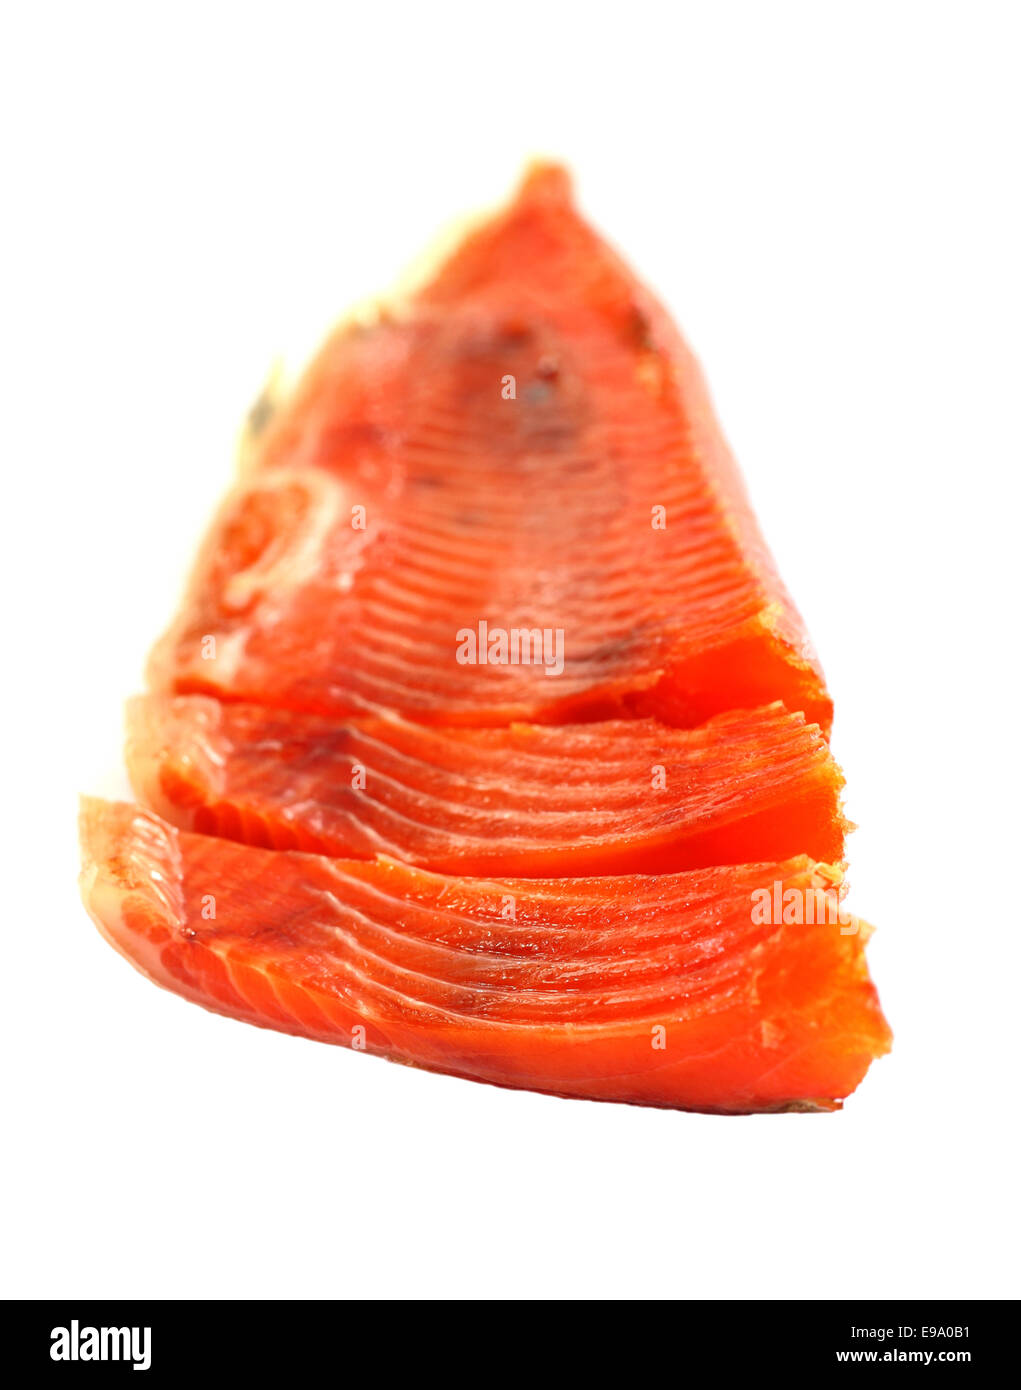 Smoked red fish fillet over white Stock Photo